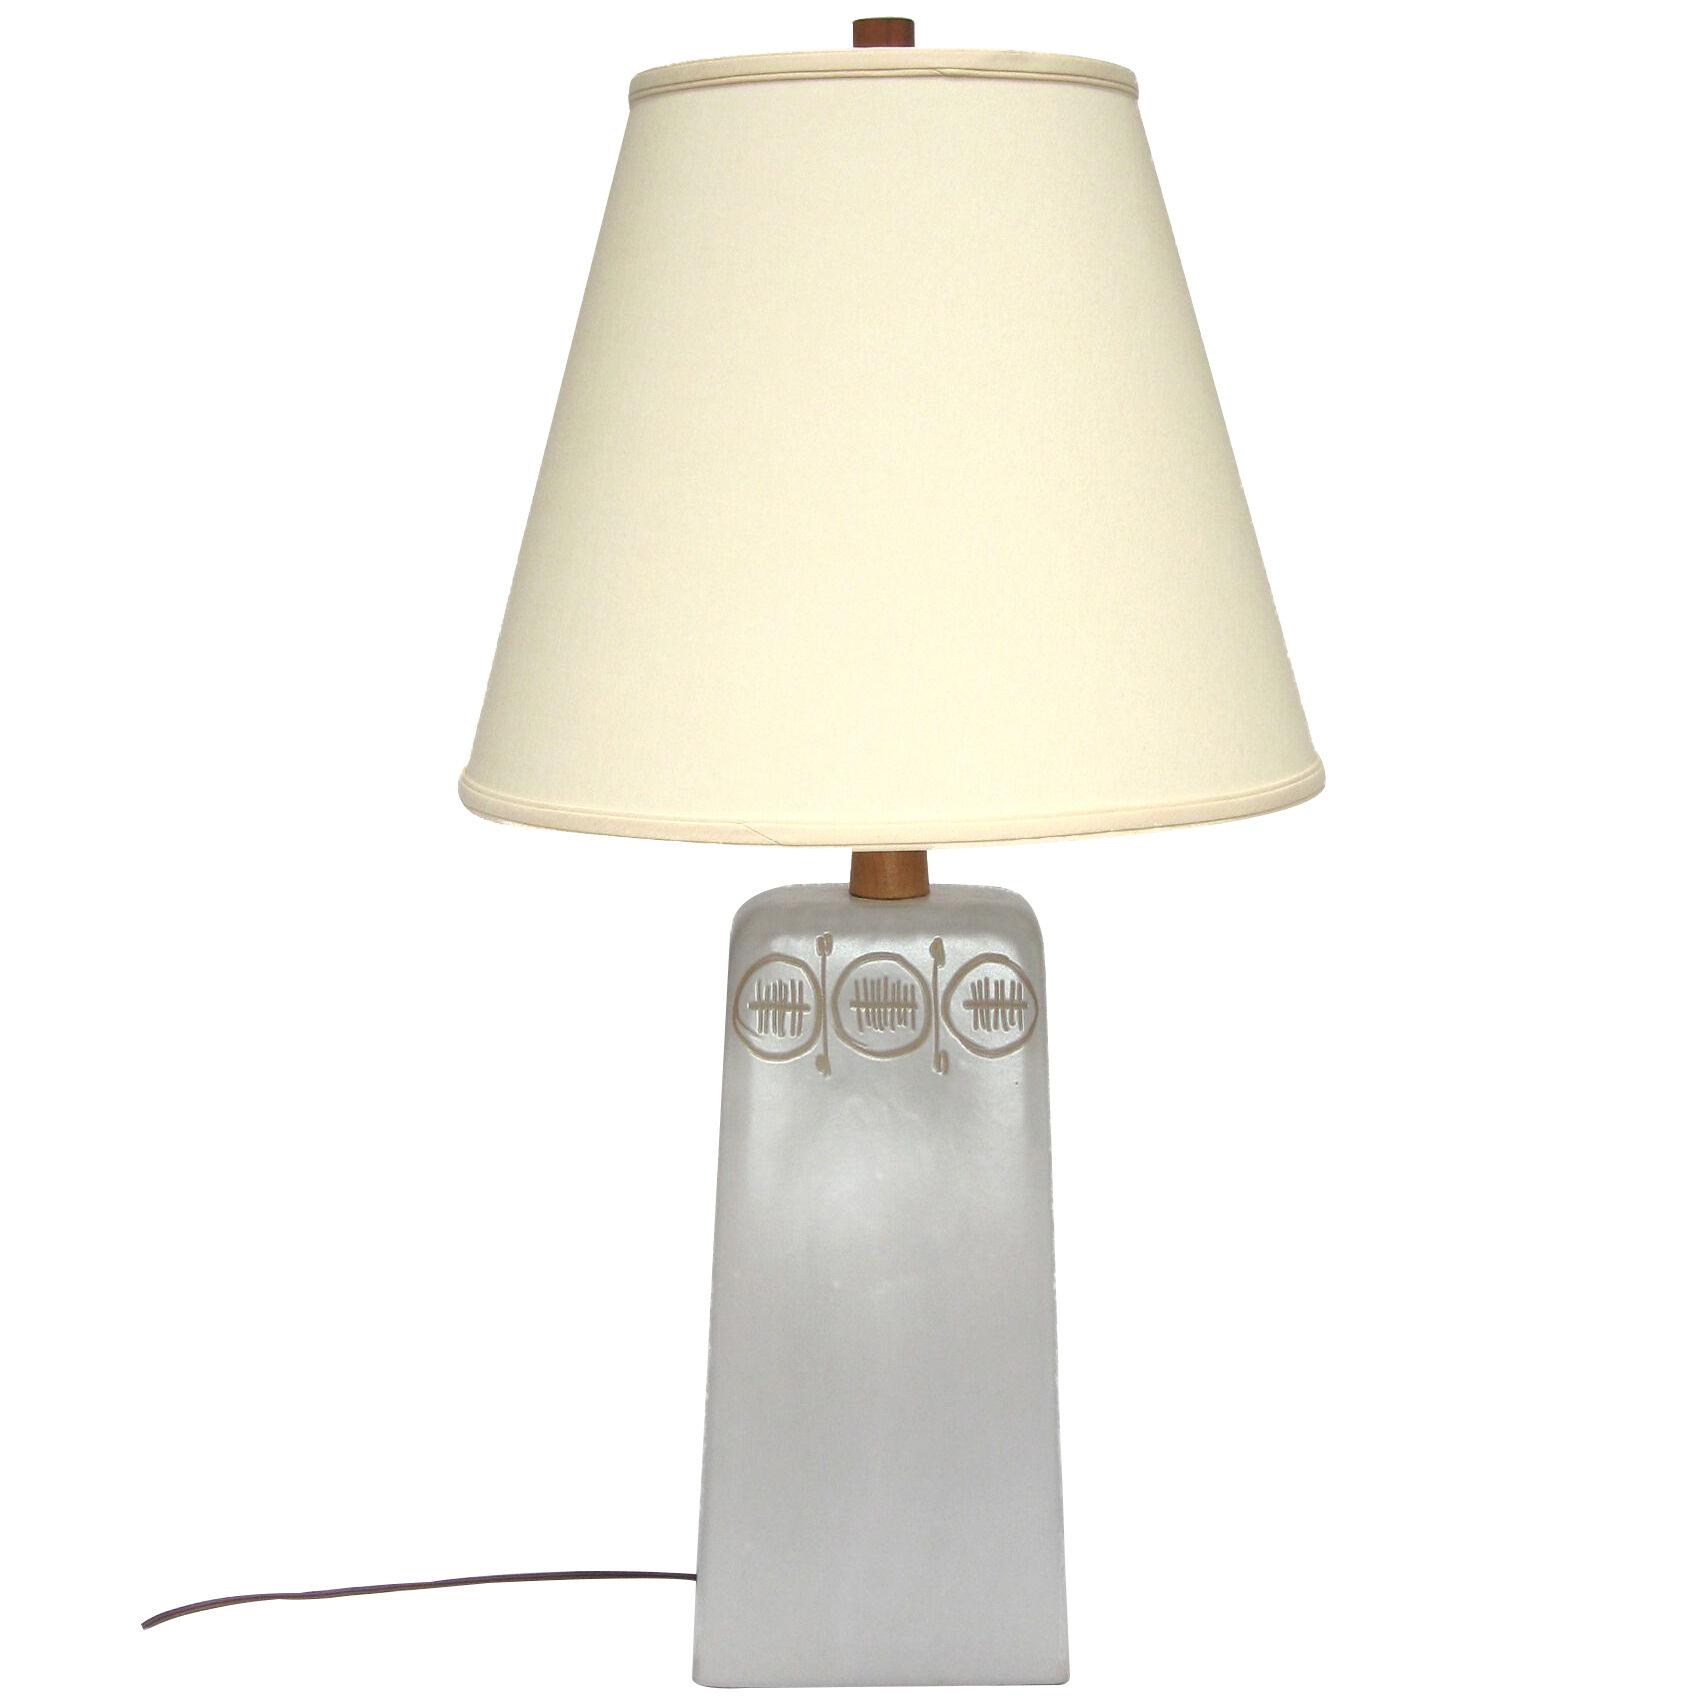 Martz Table Lamp with Sgraffito Decoration